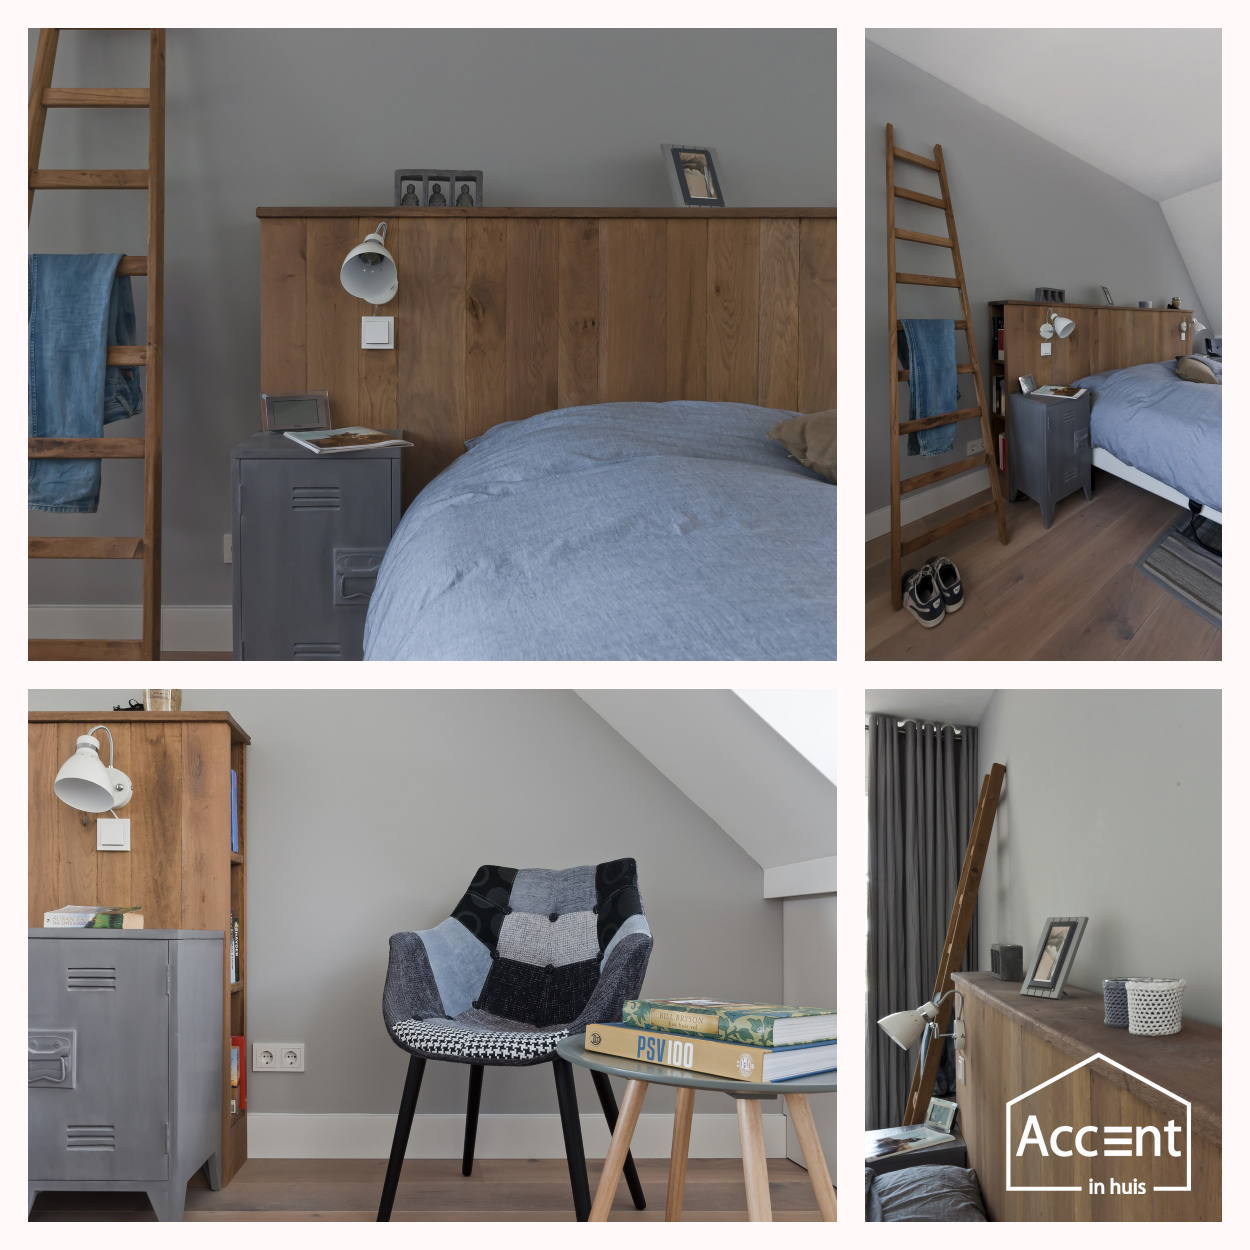 Accent in Huis